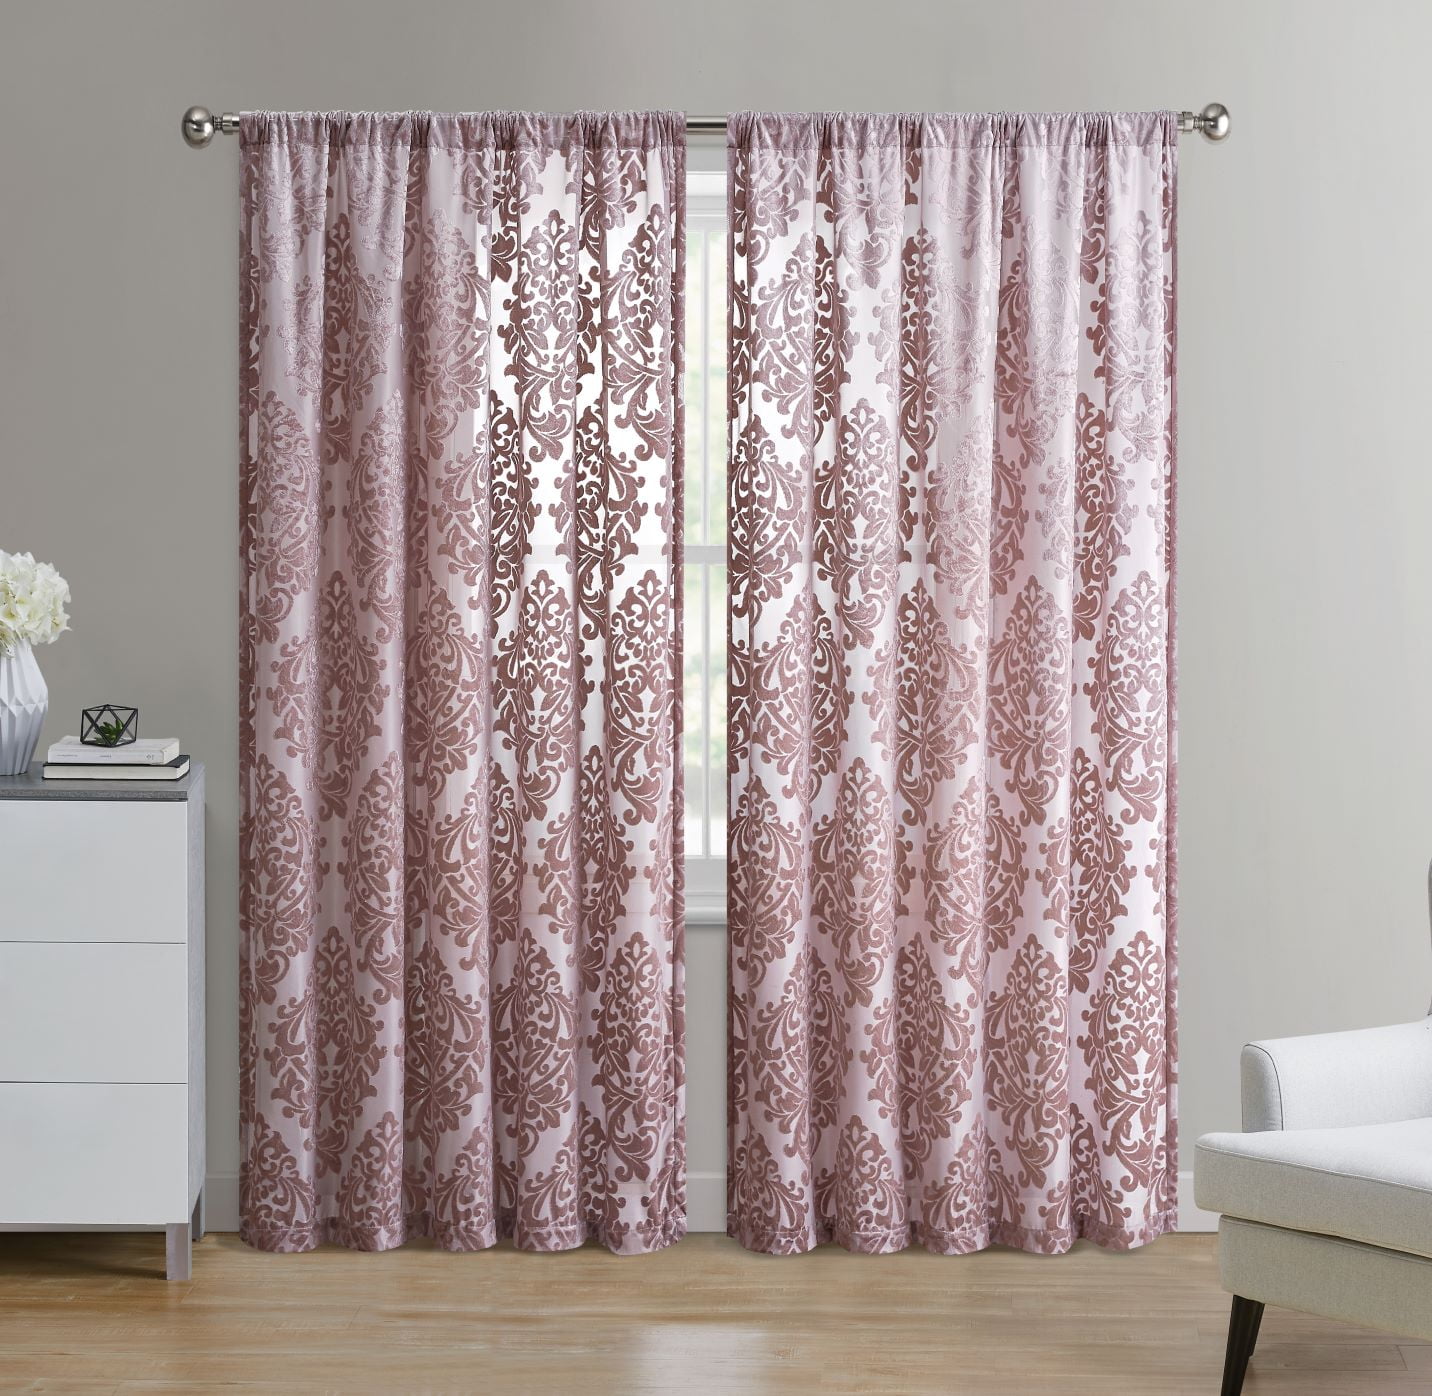 NAPEARL 1 Panel Embroidered Sheer Curtains Leaf Drapes for Living Room Hook Tape 